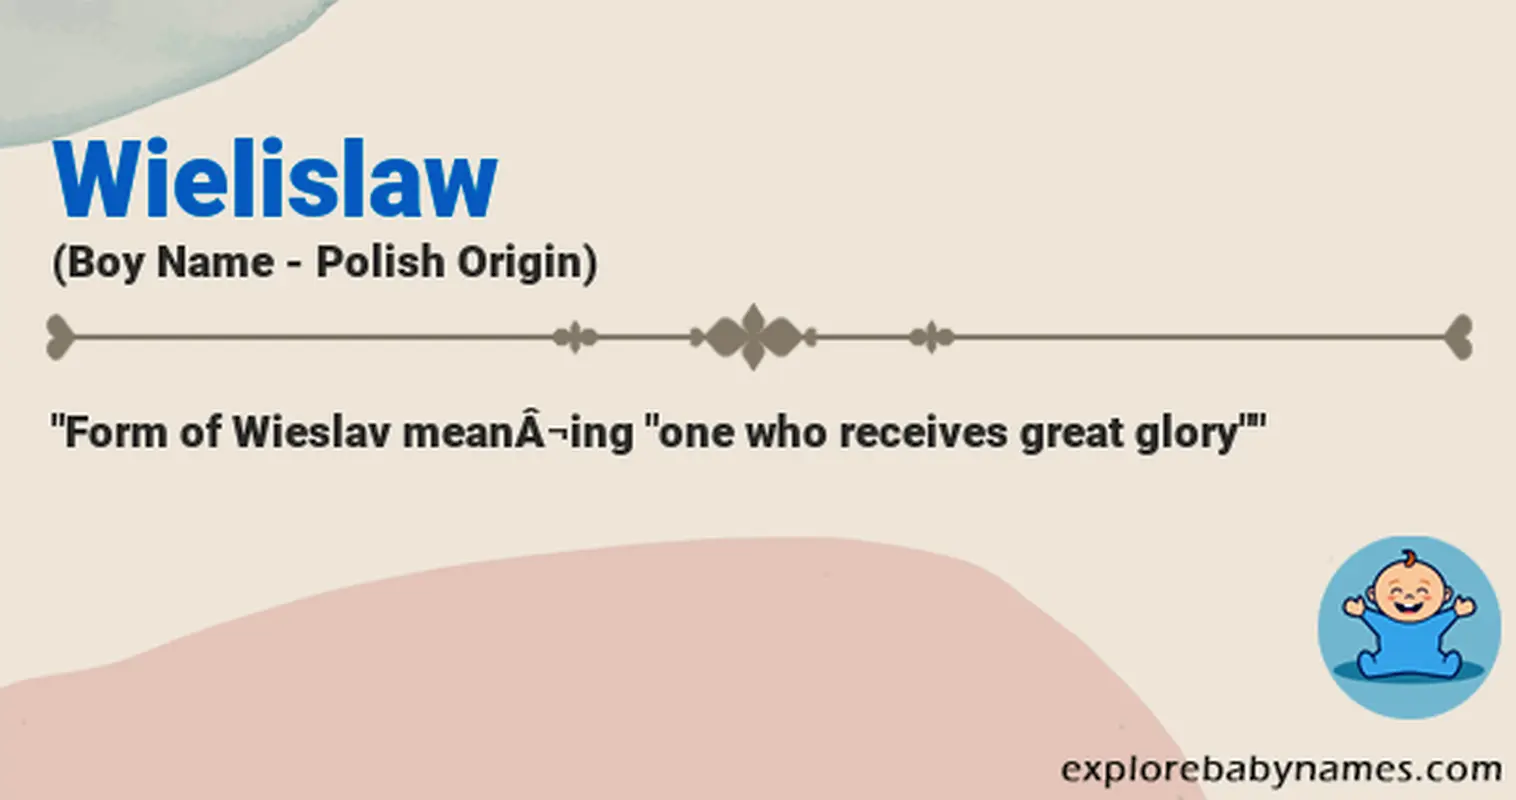 Meaning of Wielislaw